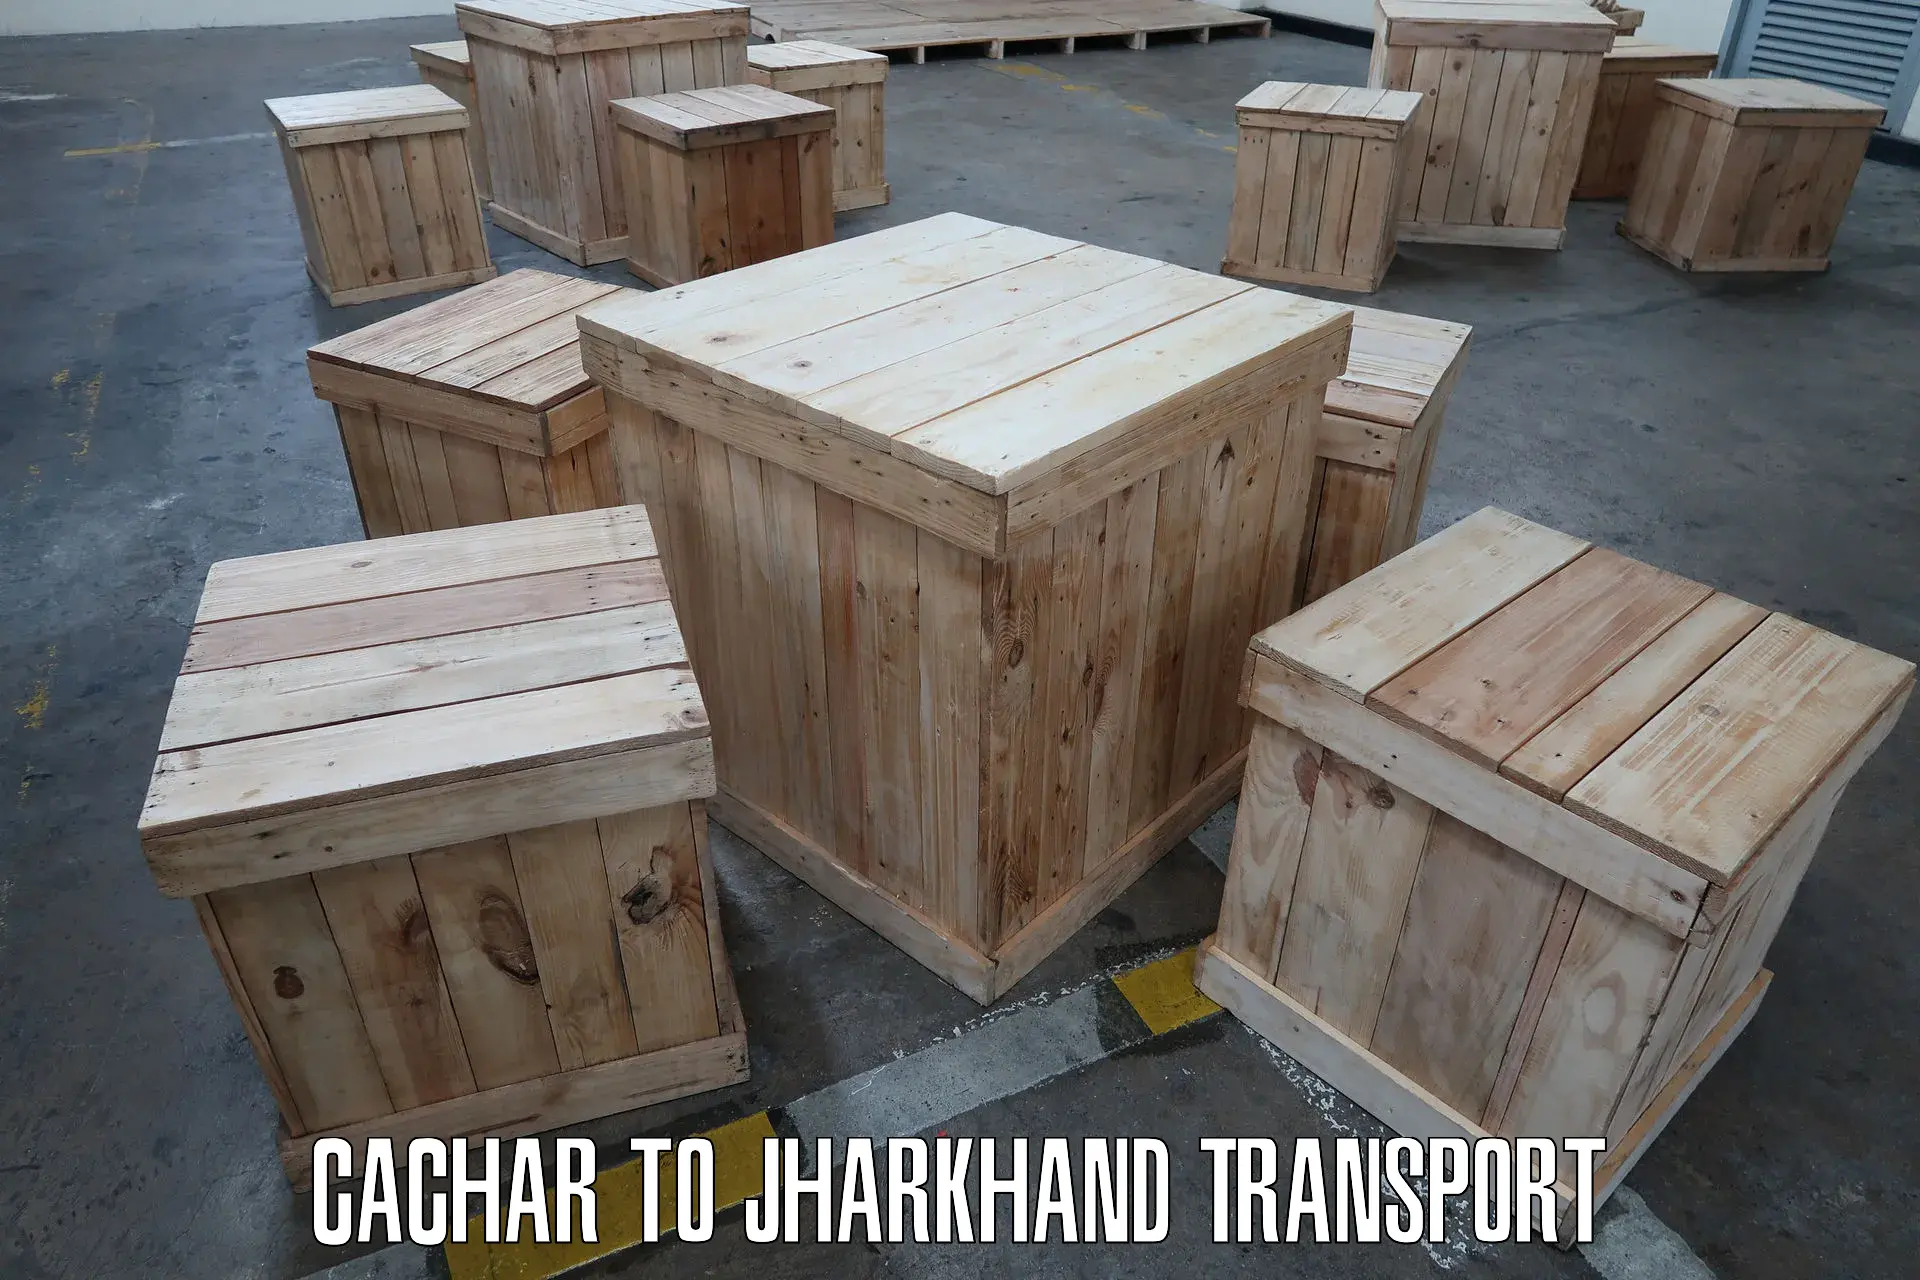 Furniture transport service Cachar to Dhanbad